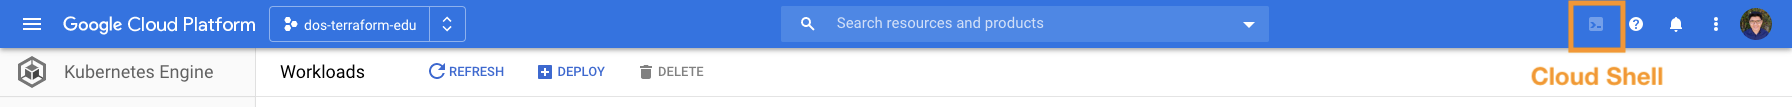 Google Cloud header with "Cloud Shell" option pointed out (top right corner near the help button)